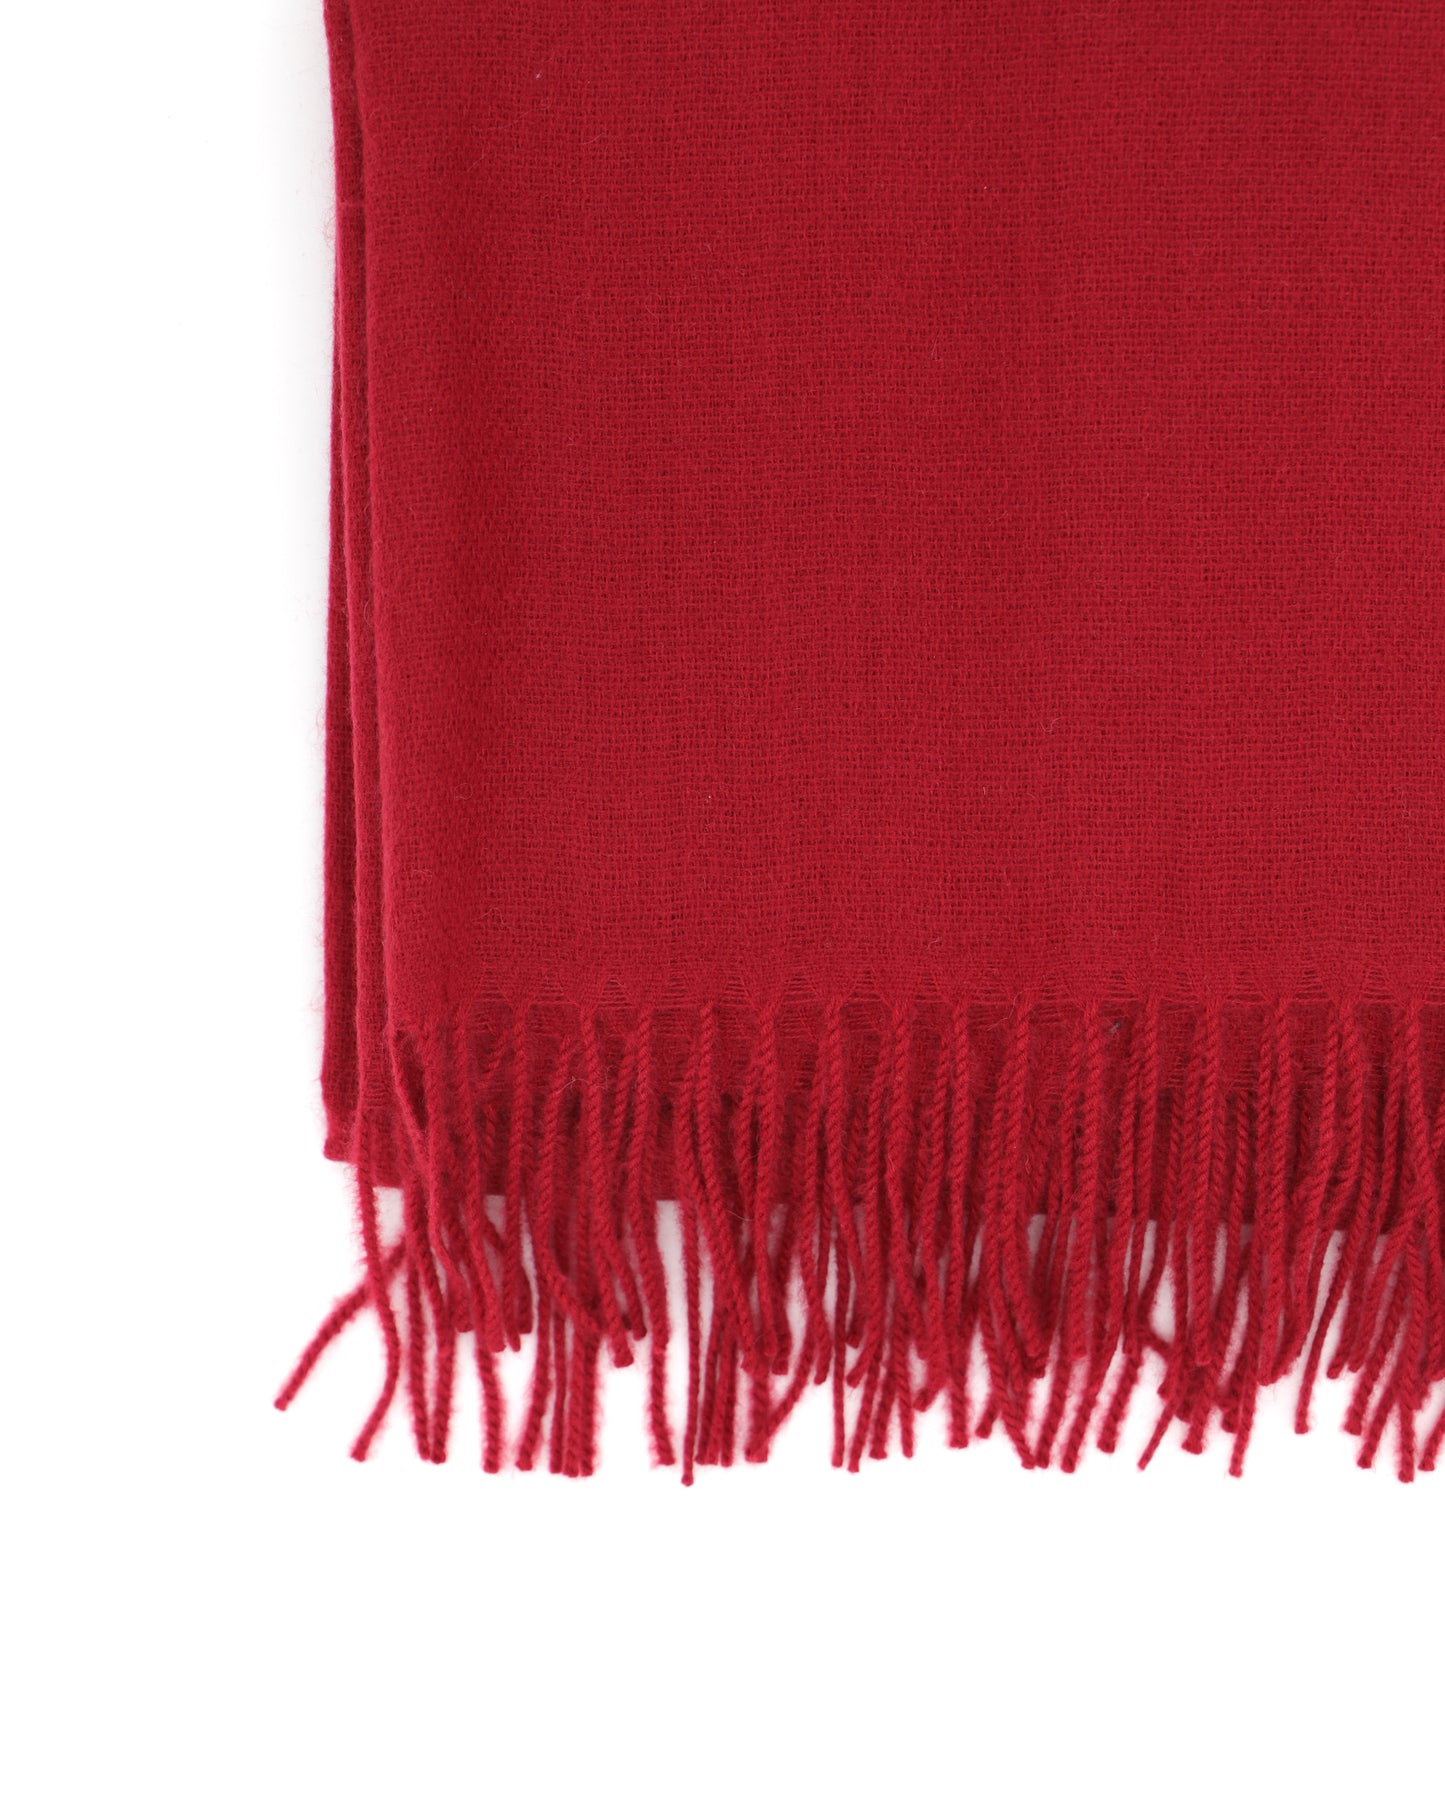 Soft Wool and Cashmere Scarf - Burgundy Red - Scarf Designers